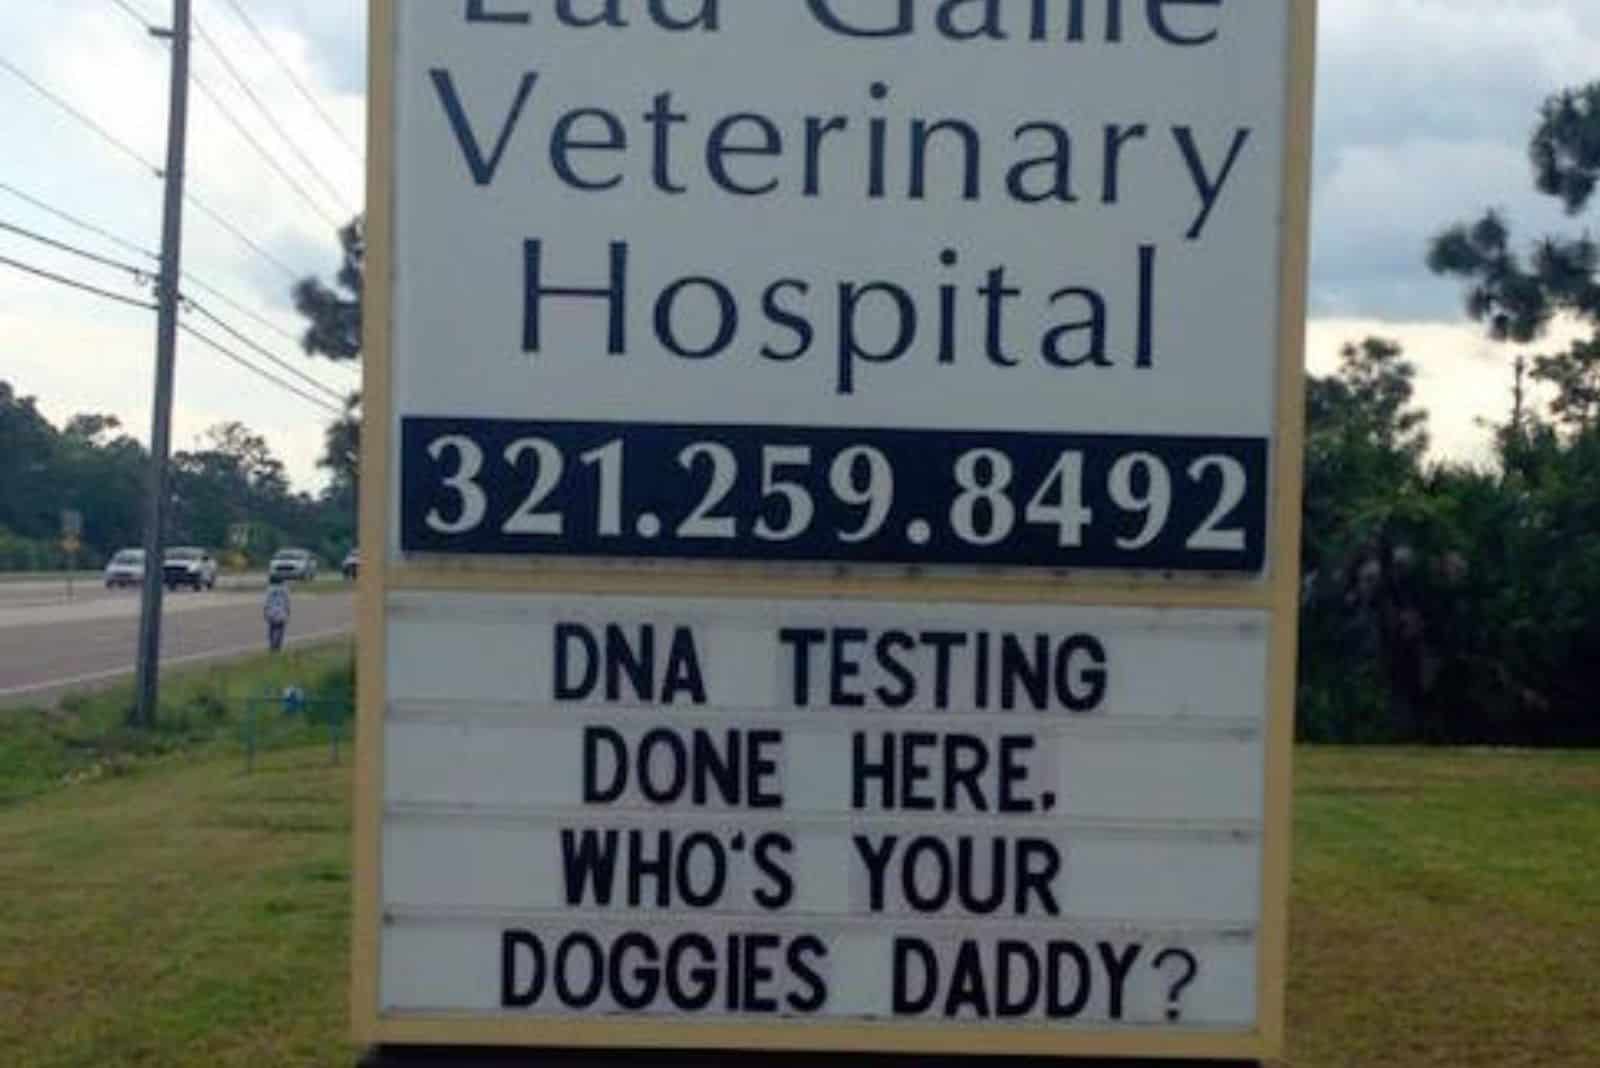 funny sign about dna testing at a vet clinic